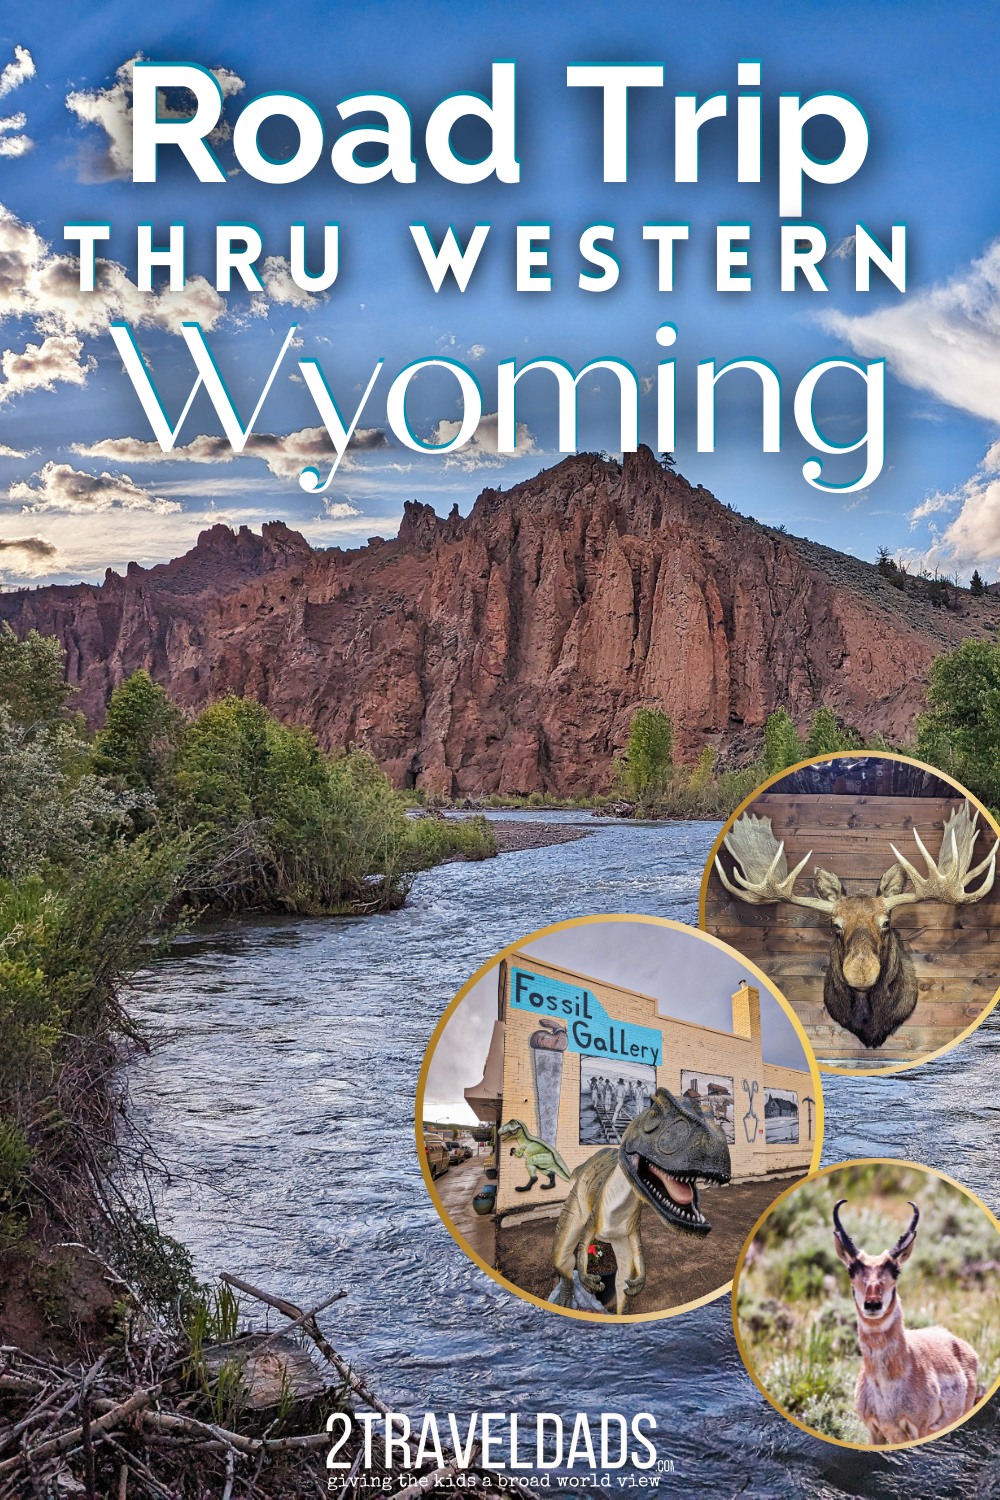 This Western Wyoming road trip plan is fun and flexible, great for visiting Yellowstone, having cowboy experiences in Cody and digging for dinosaurs in fossil country. Check out this itinerary for a very different sort of Wyoming adventure.